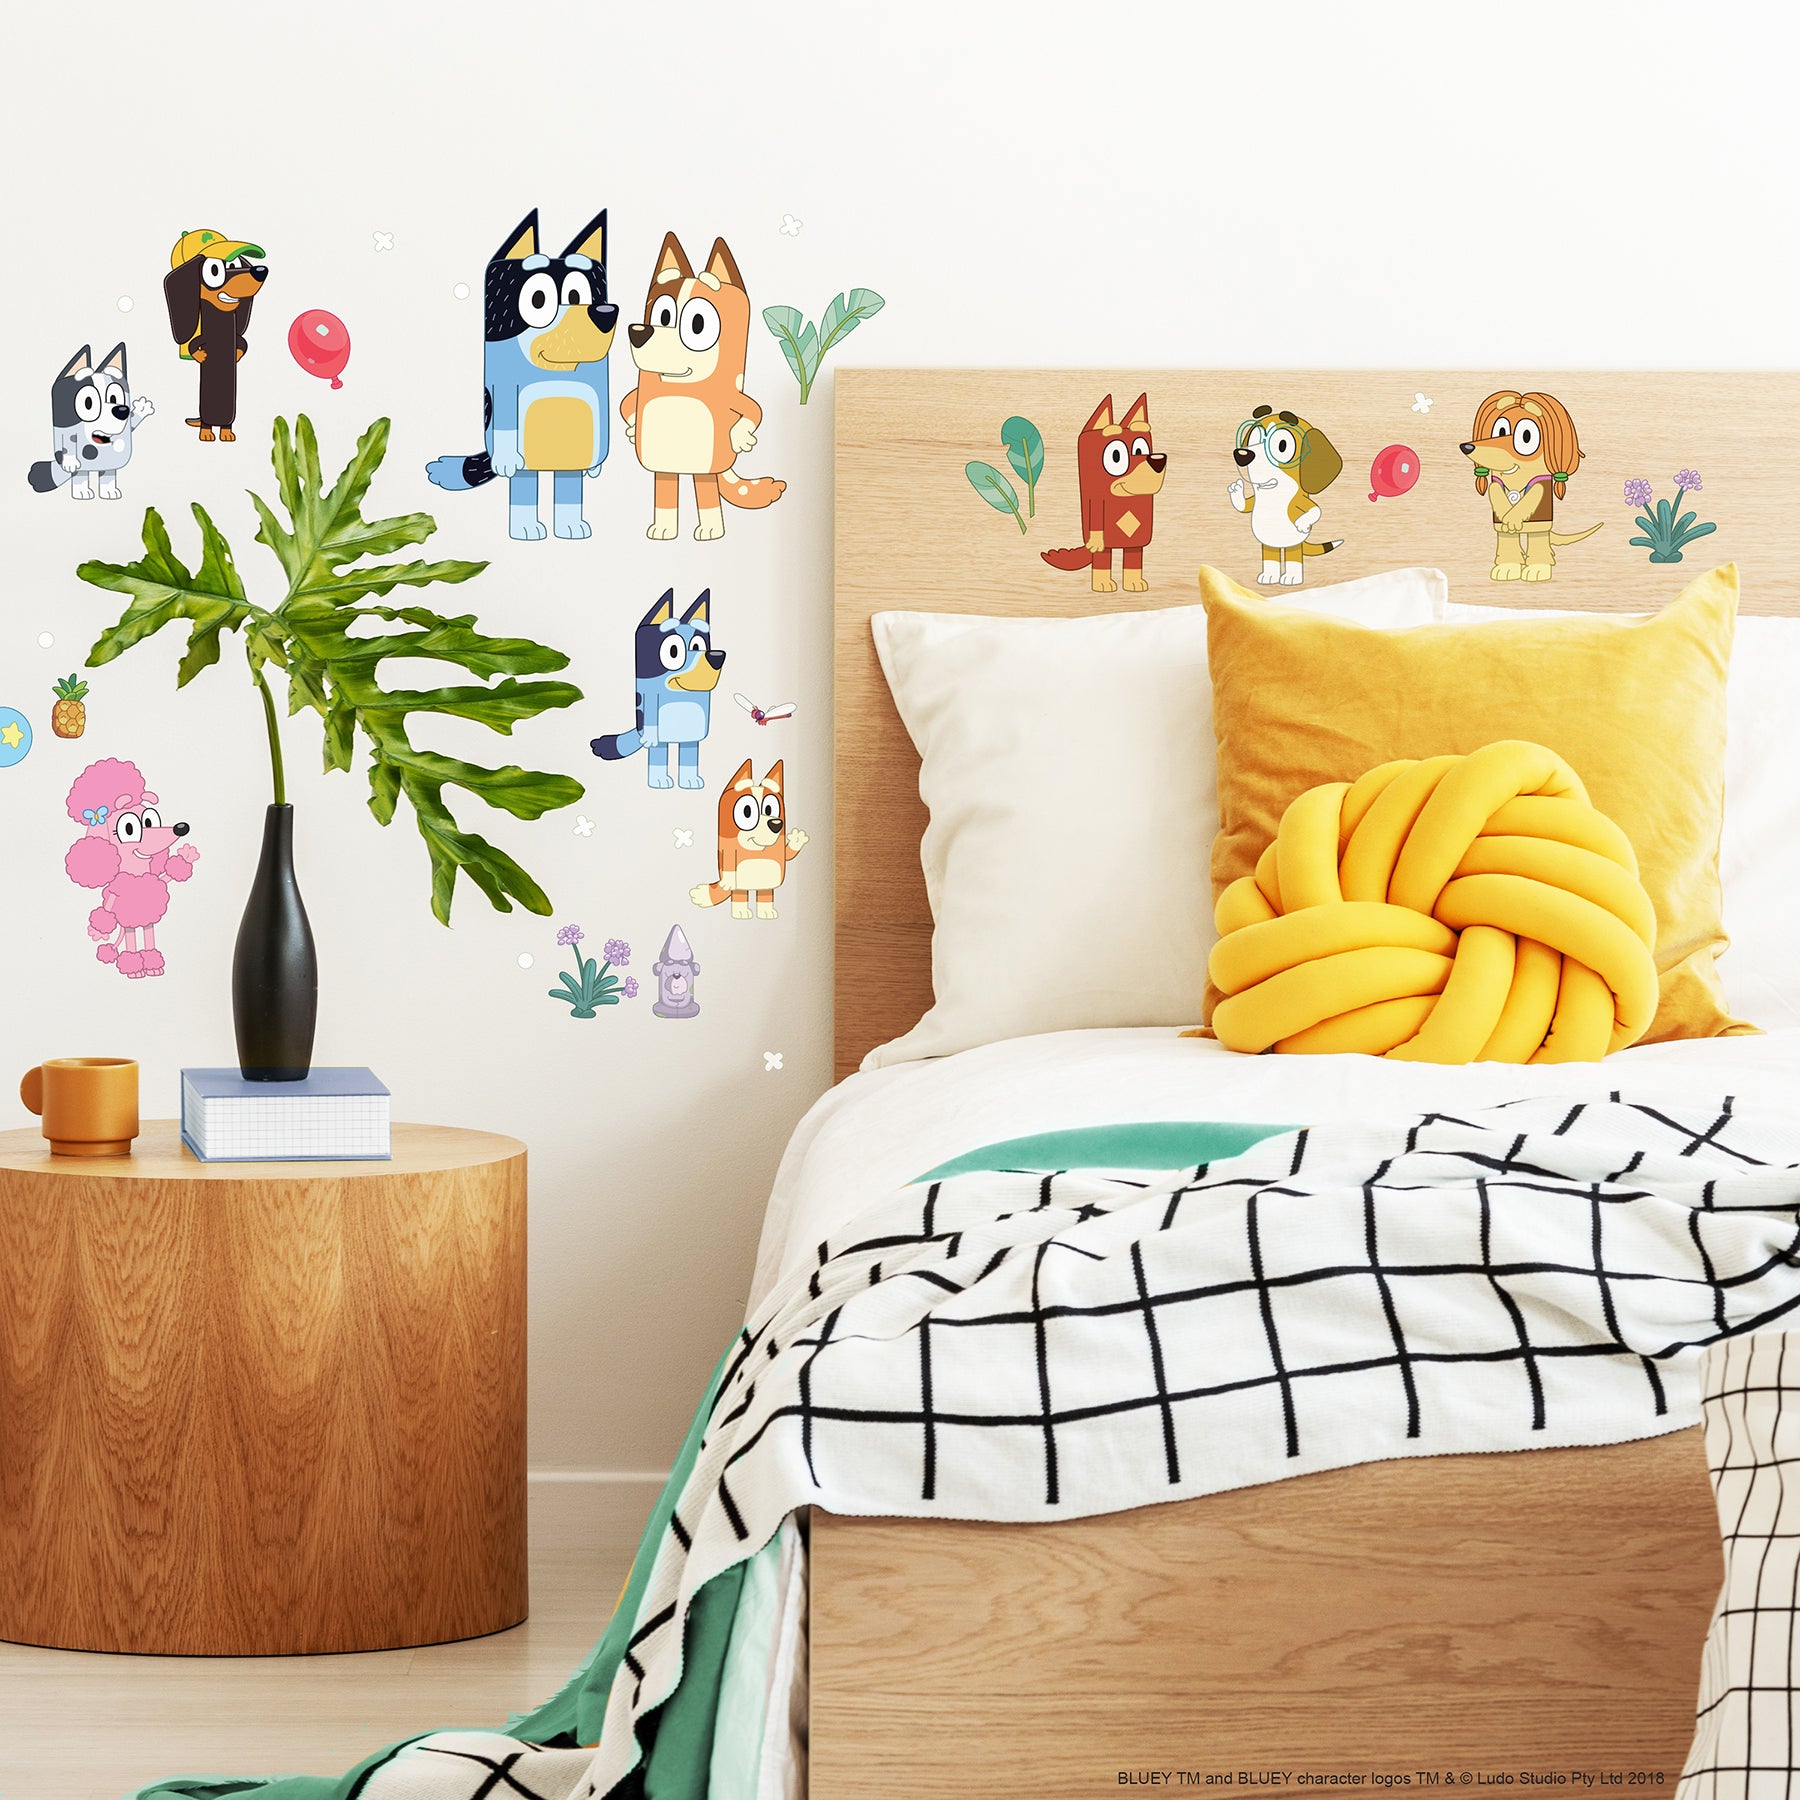 Bluey Family & Friends Peel and Stick Wall Decals Wall Decals RoomMates Decor   